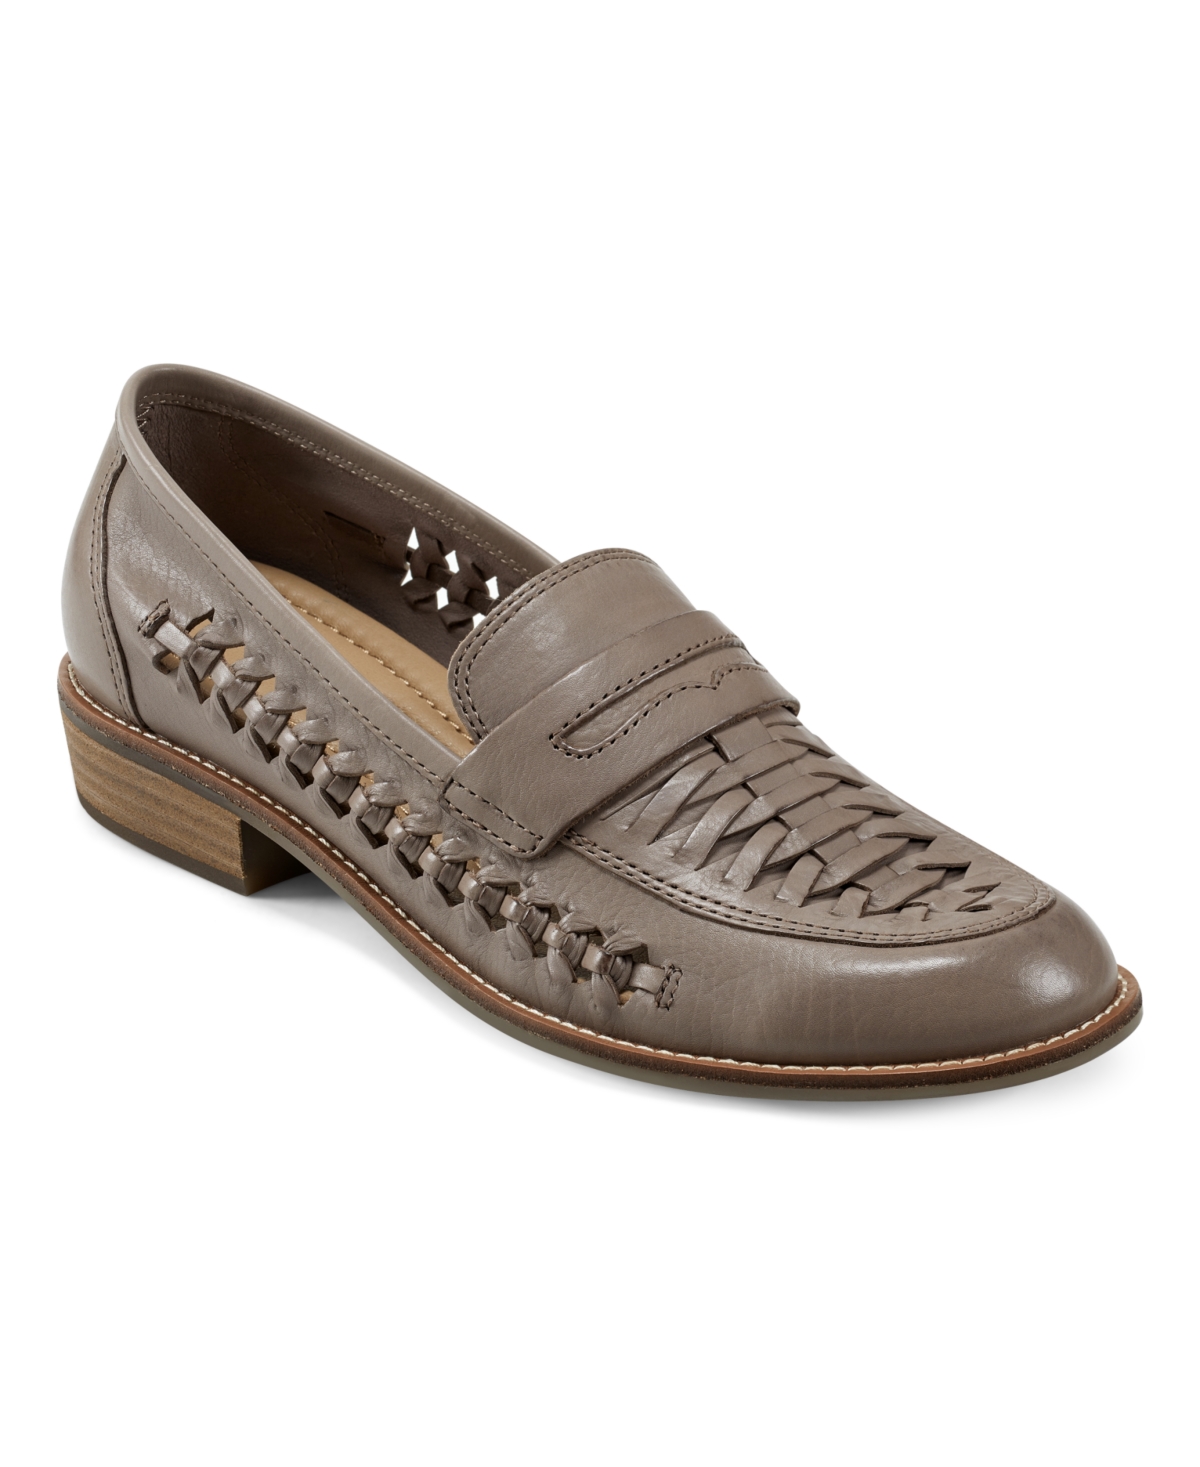 Earth Women's Ella Round Toe Slip-On Casual Flat Loafers - Taupe Nubuck